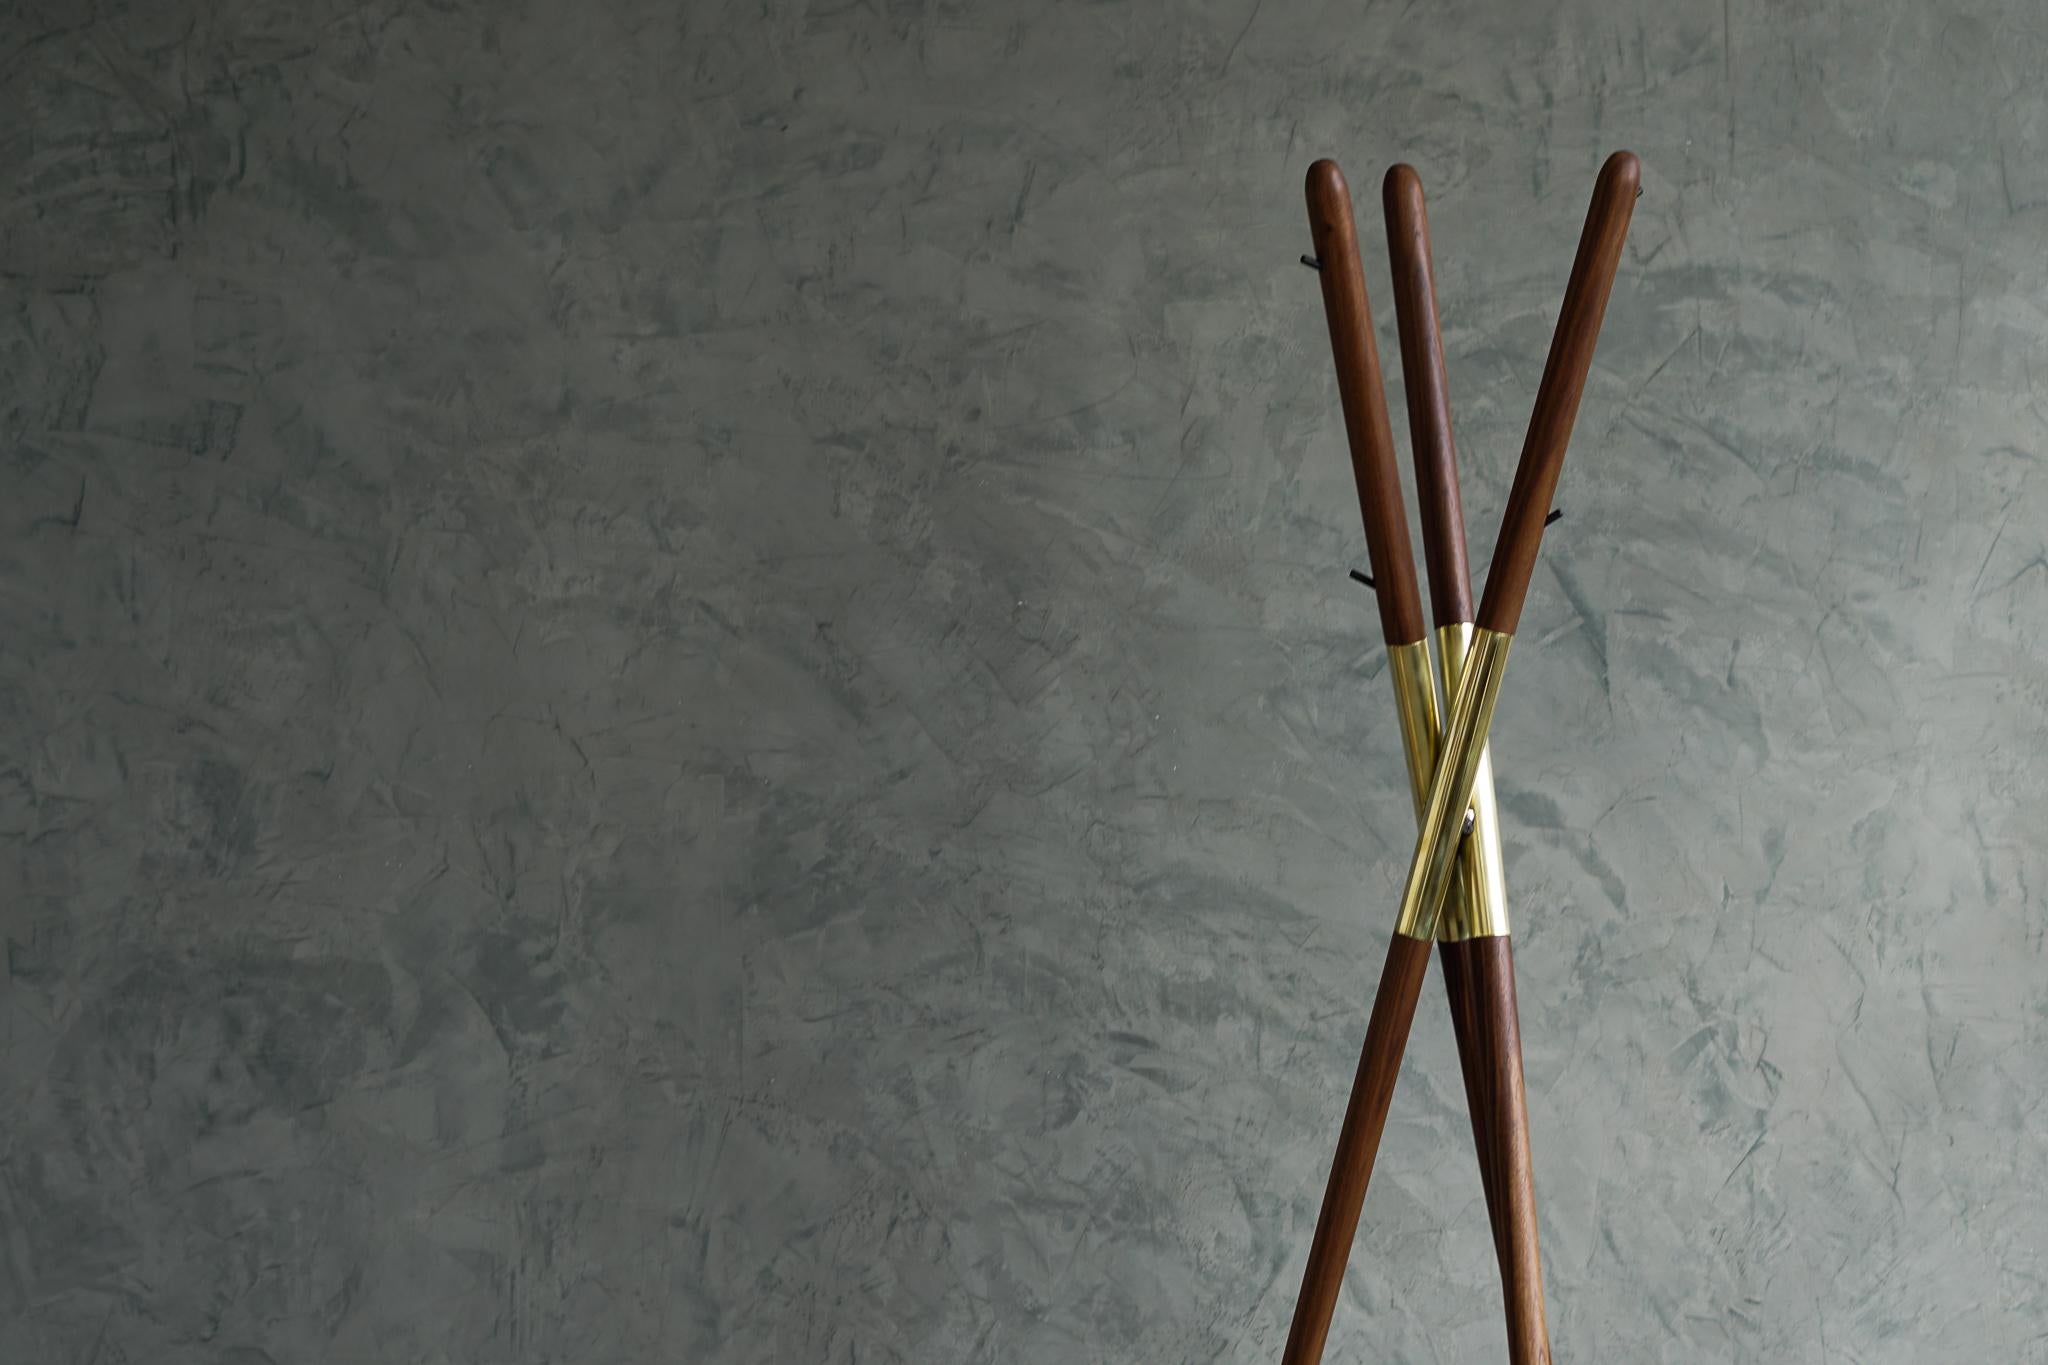 The Hashi coat rack is designed after a widely known tool, the chopsticks. Created from walnut and polished brass. The Hashi mimics the simplicity and timelessness of this ancient tool used daily by millions around the globe.